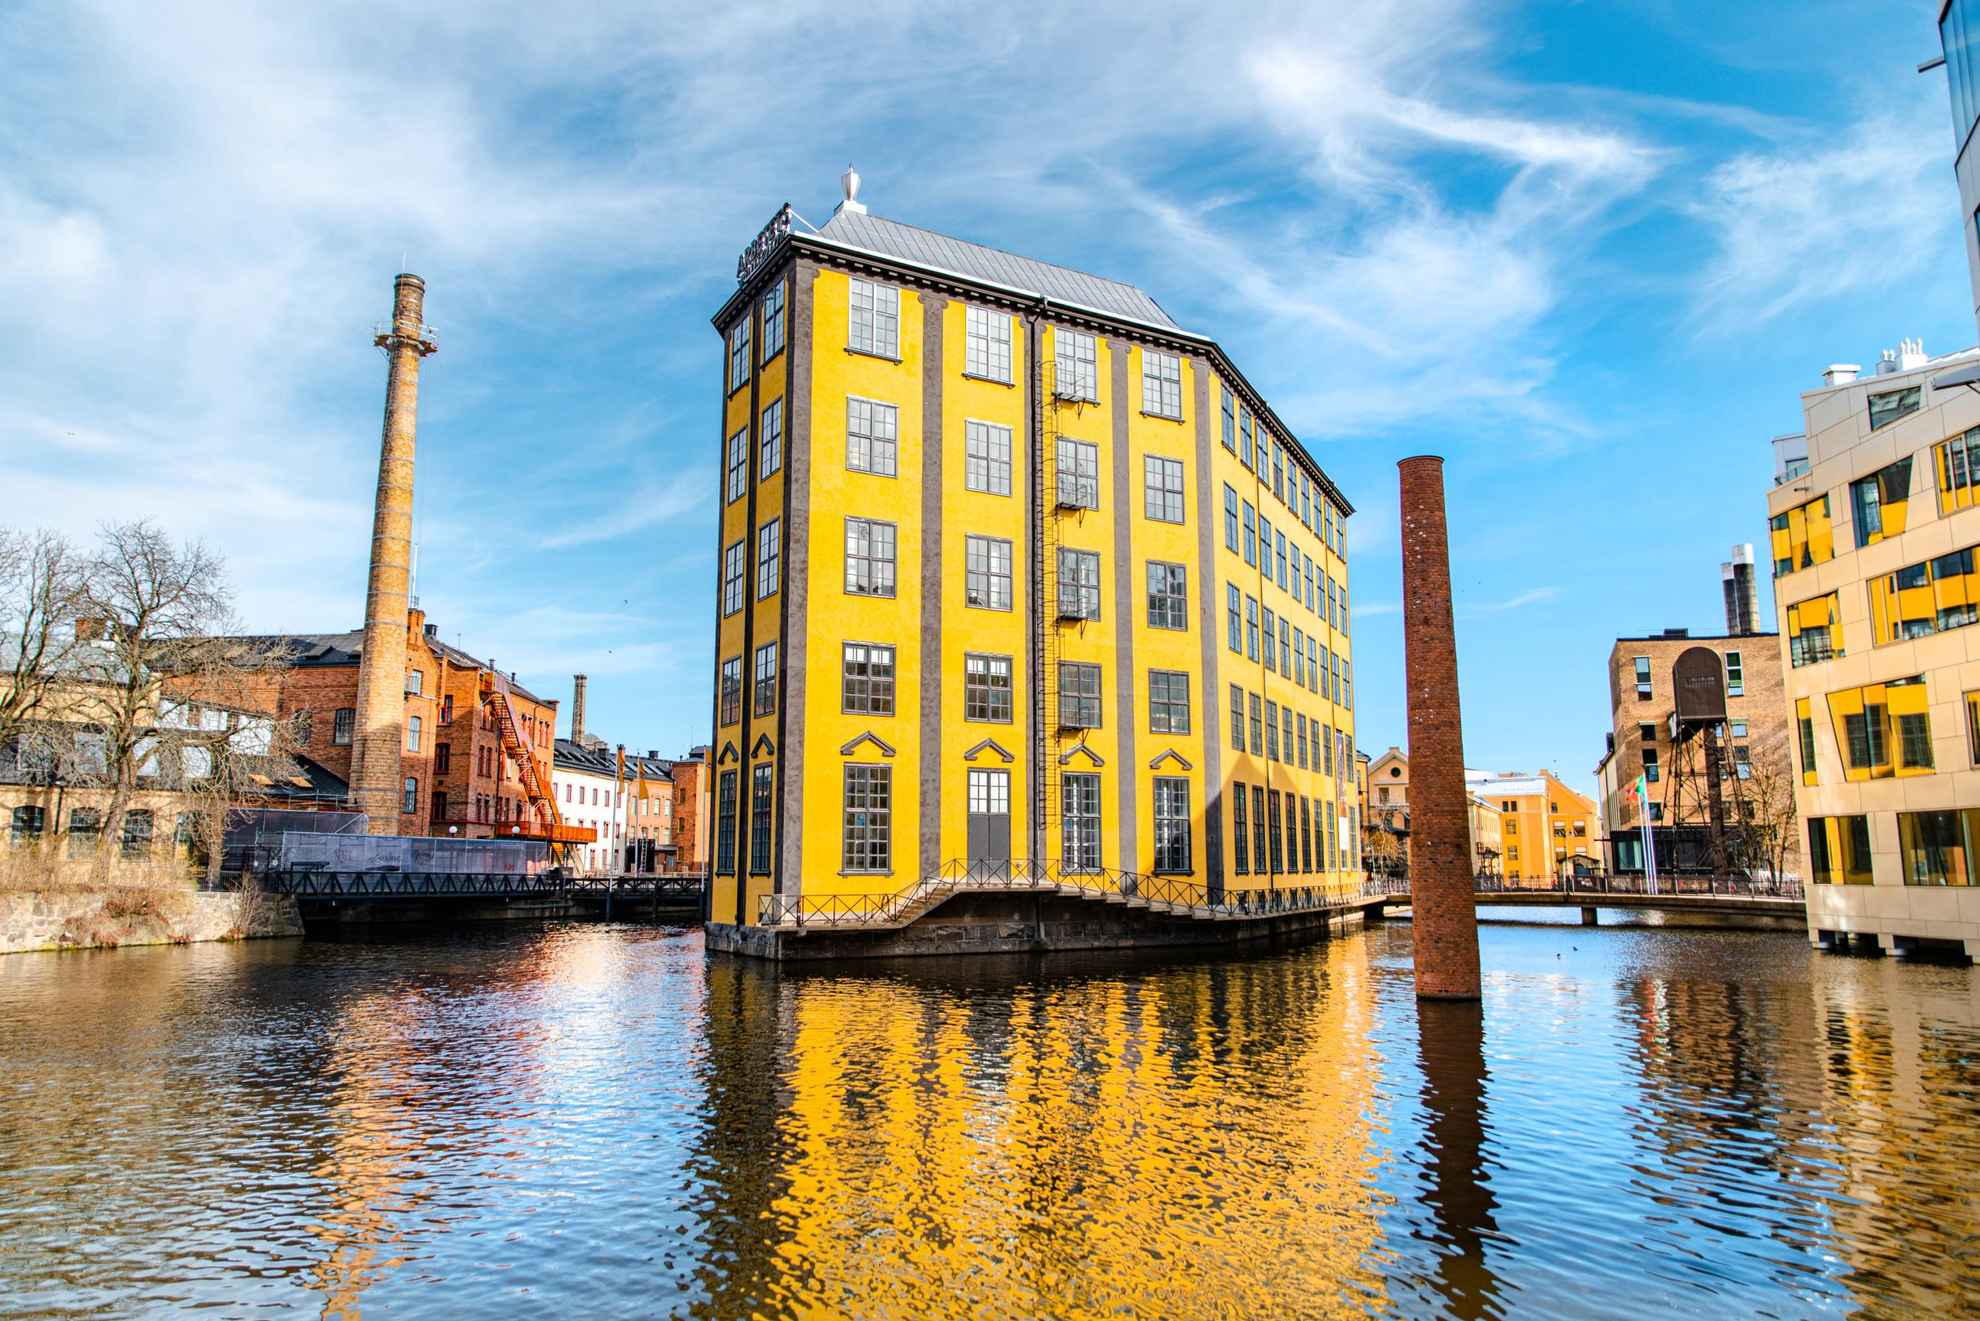 An industrial building with a unique architecture that reminiscent of a flatiron is surrounded by water.